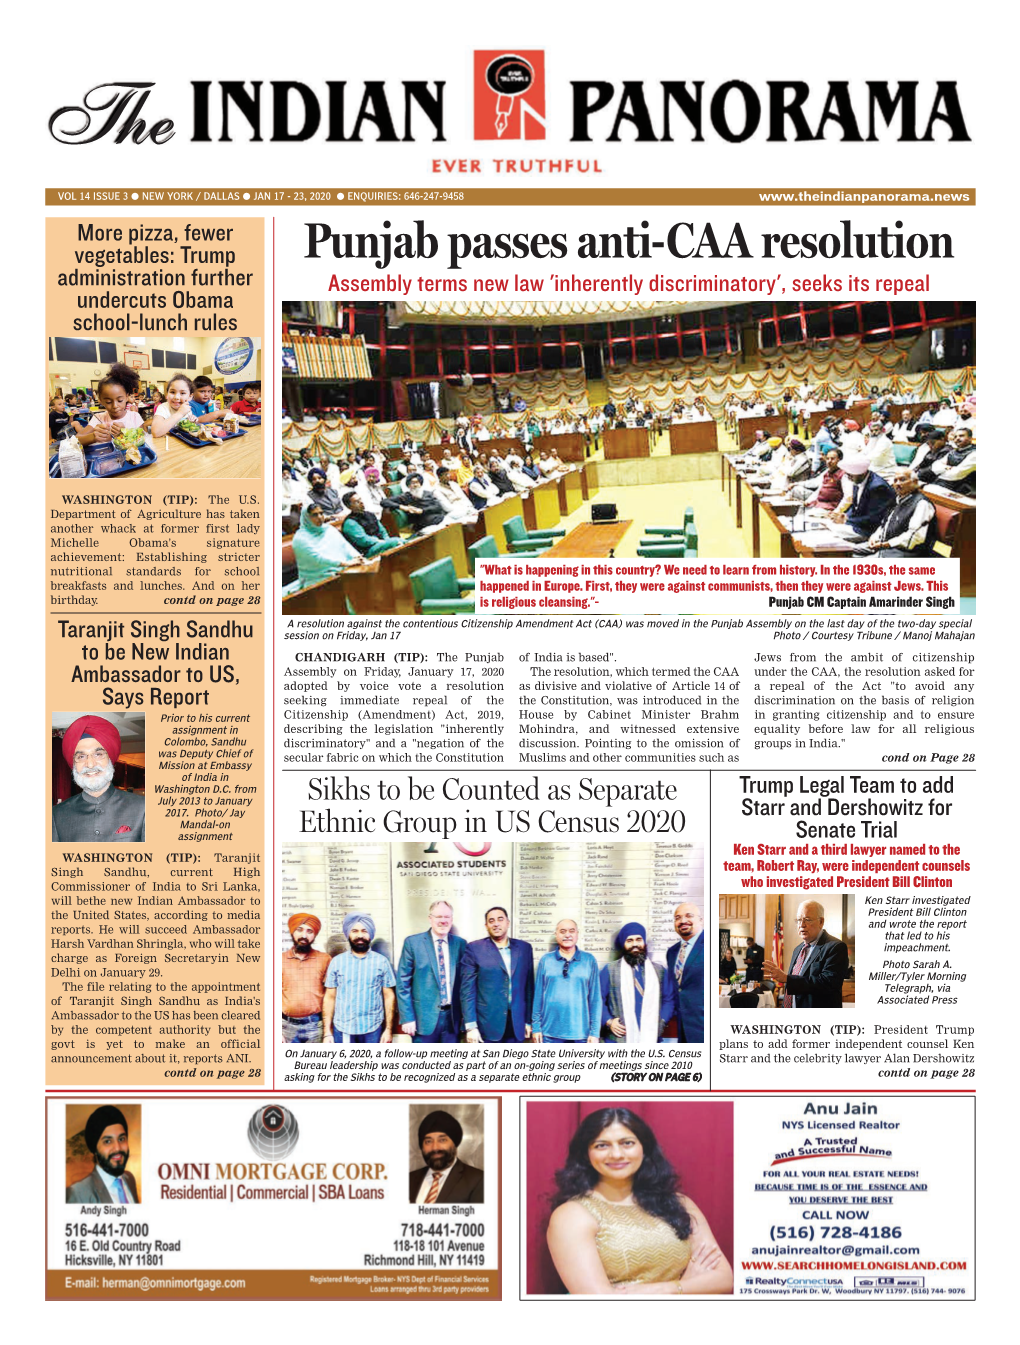 Punjab Passes Anti-CAA Resolution Administration Further Assembly Terms New Law 'Inherently Discriminatory', Seeks Its Repeal Undercuts Obama School-Lunch Rules